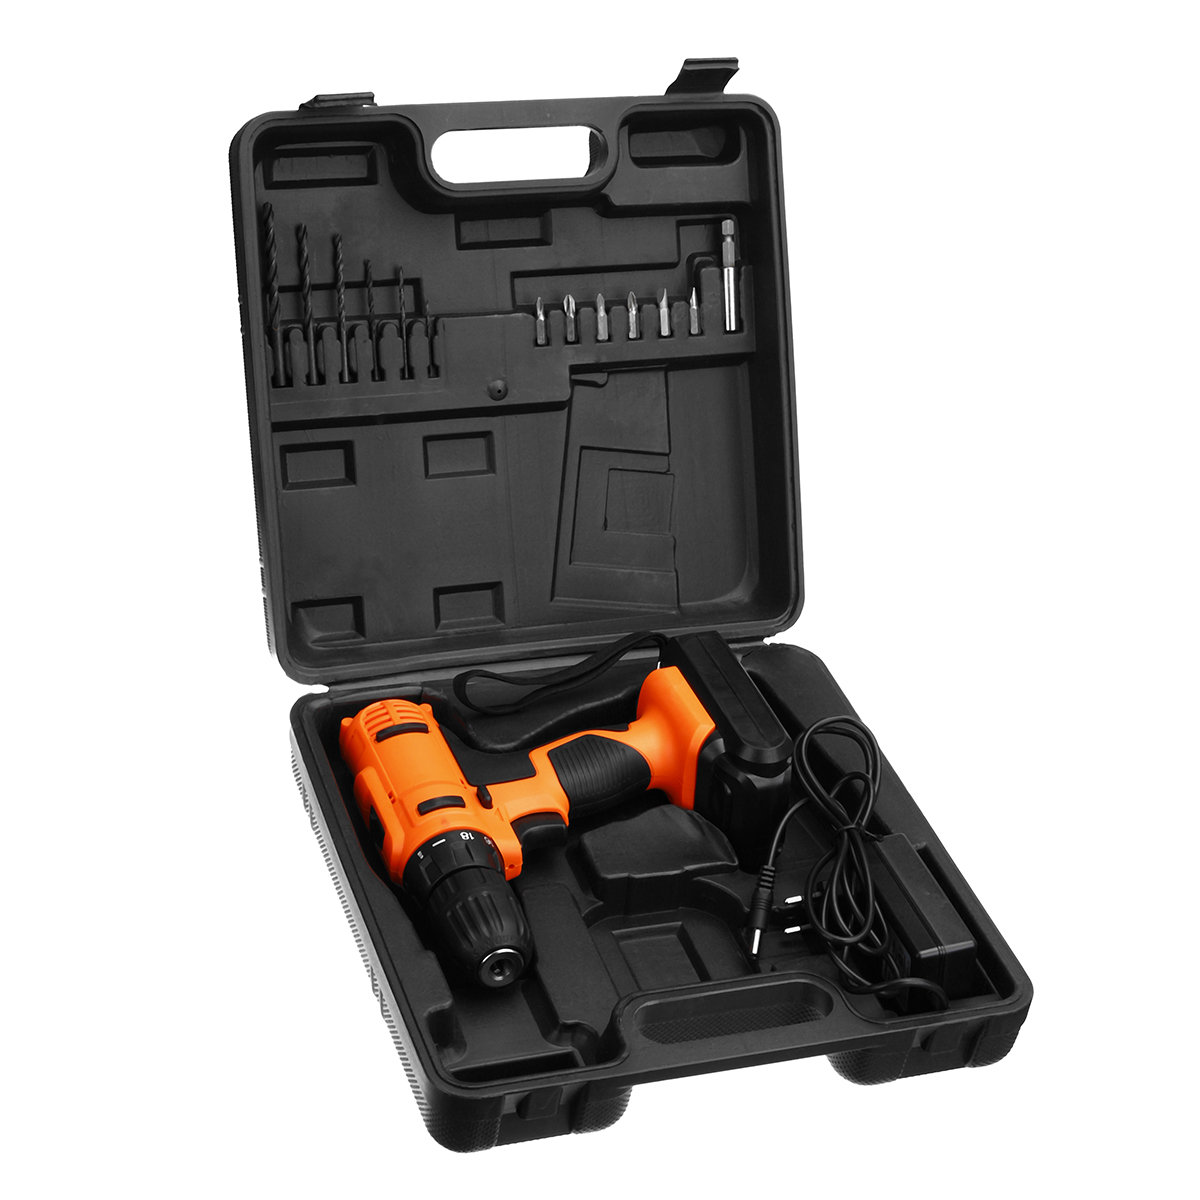 18V-Electric-Screwdriver-Cordless-Hammer-Impact-Power-Drill-Driver-Rechargeable-with-13Pcs-Drill-Bit-1324472-6